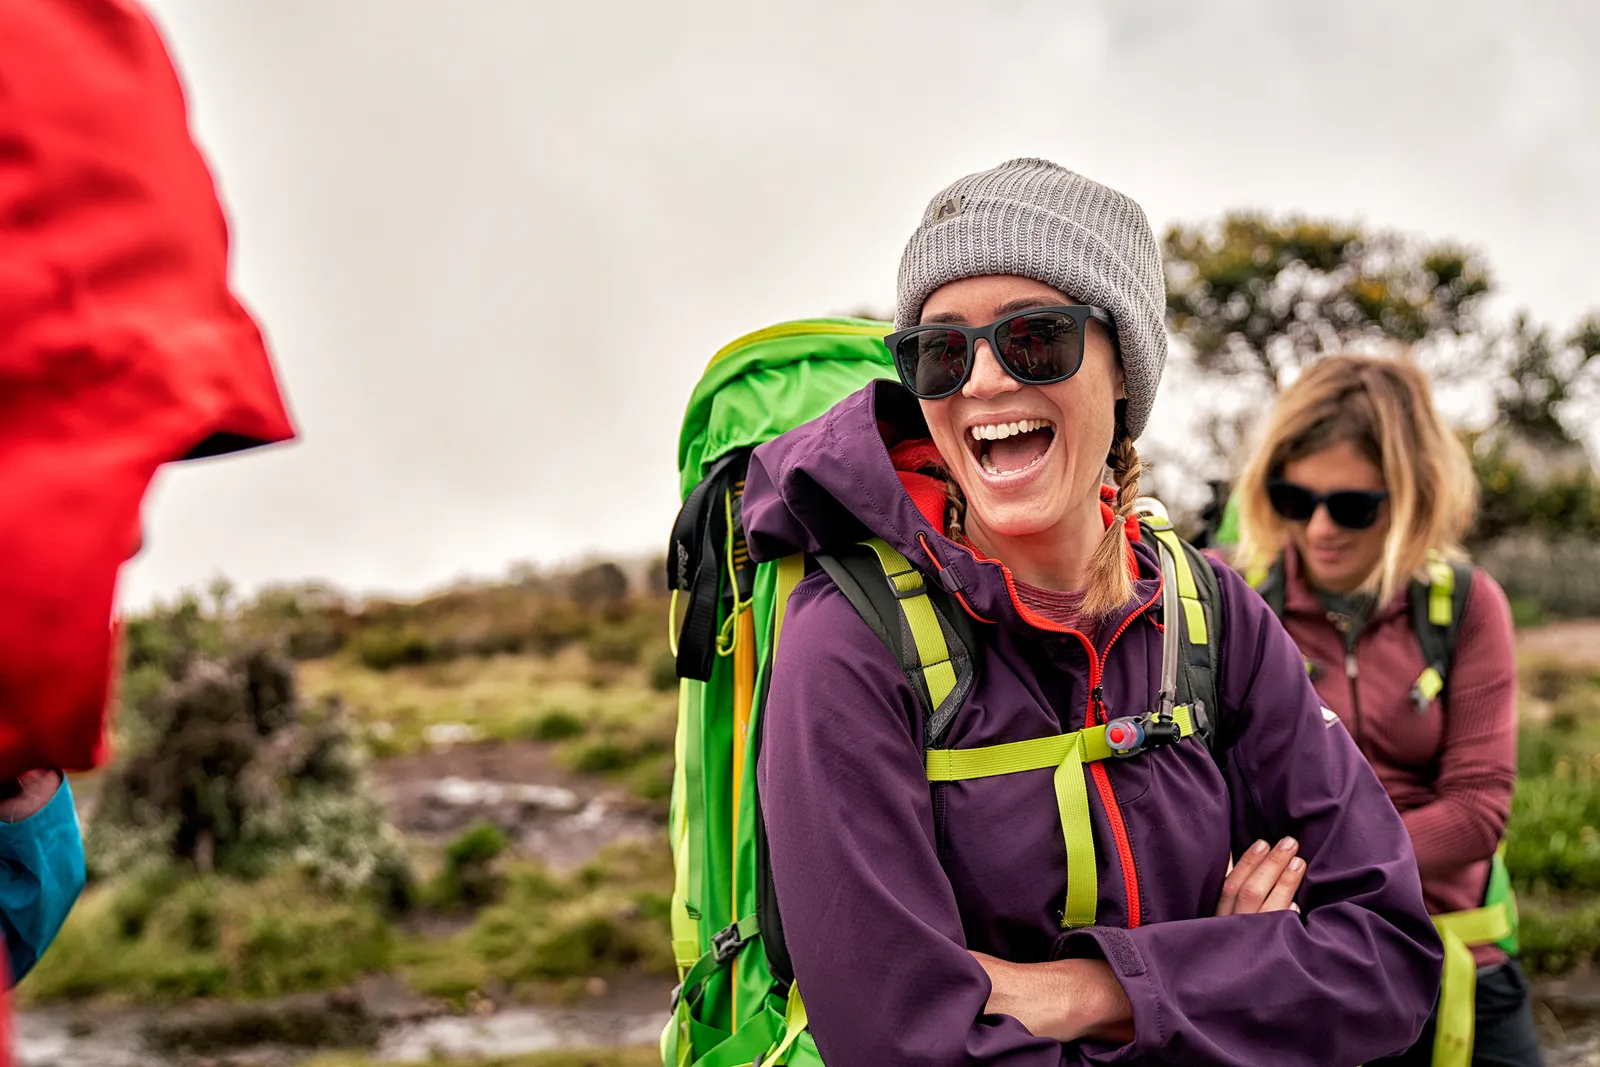 How to choose the best sunglasses for climbing Mount Kilimanjaro